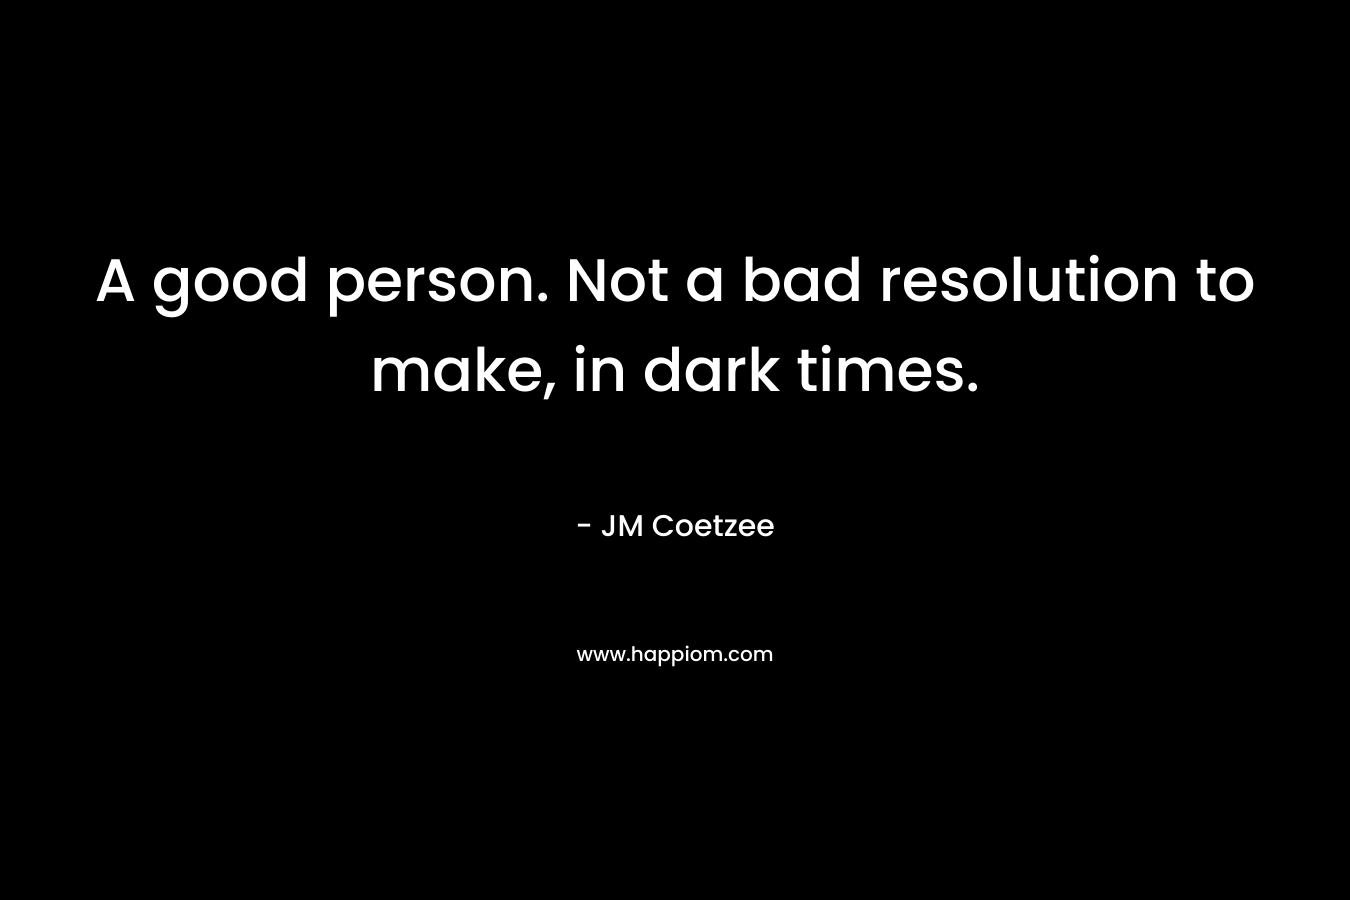 A good person. Not a bad resolution to make, in dark times. – JM Coetzee